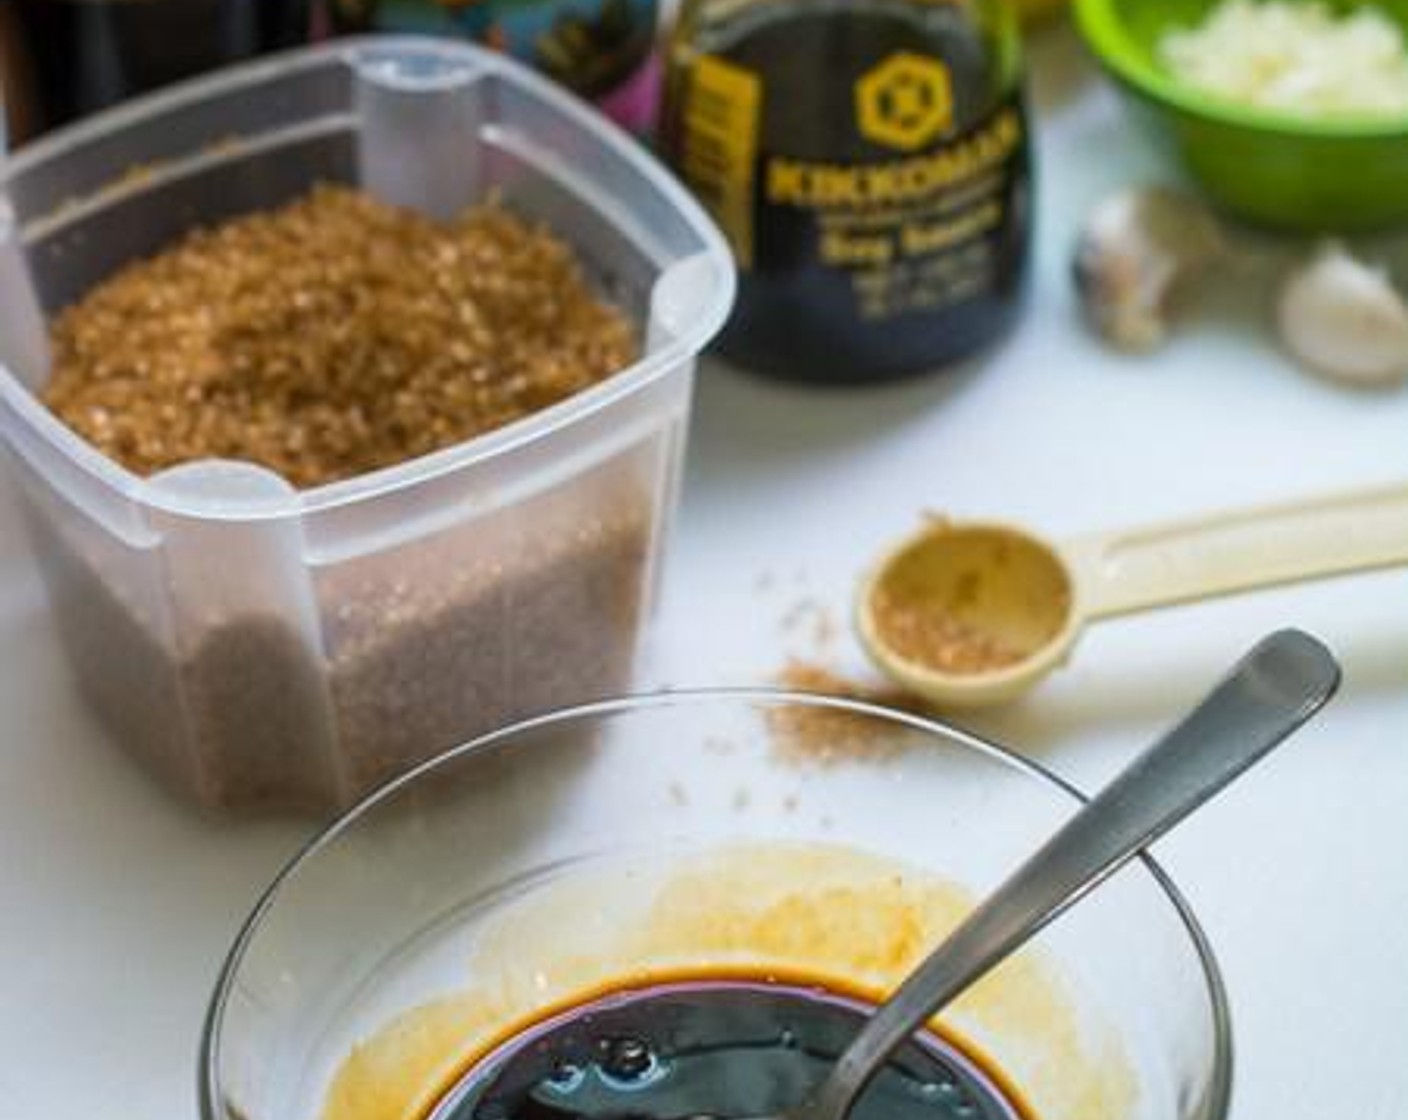 step 1 Prepare the sauce by combining Oyster Sauce (1 Tbsp), Light Soy Sauce (1/2 Tbsp), Dark Soy Sauce (1 tsp), Palm Sugar (1/2 Tbsp) and Fish Sauce (1/2 Tbsp). Set aside.